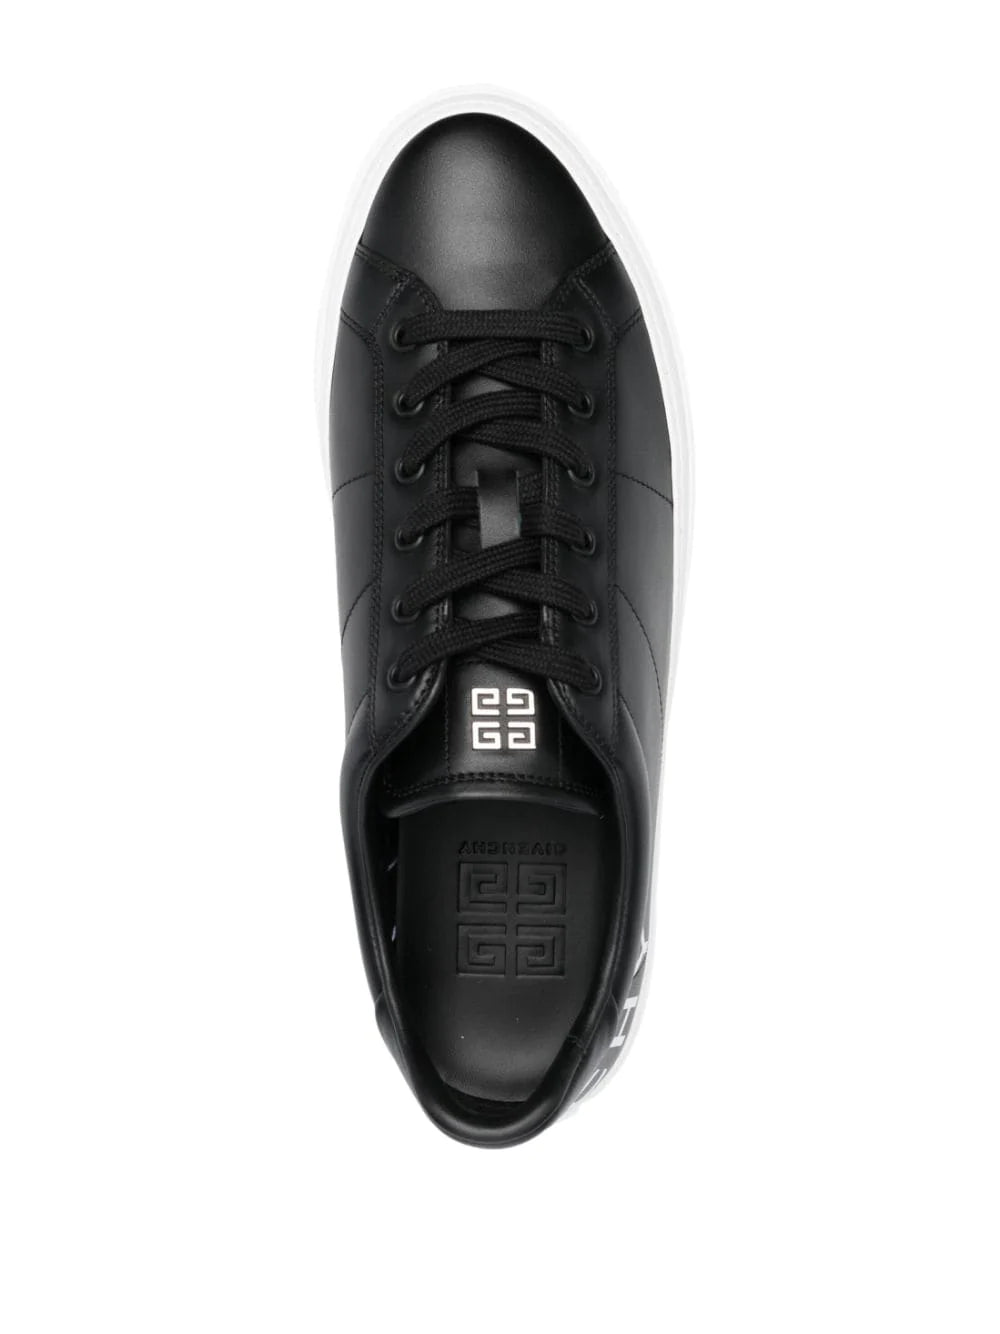 GIVENCHY Sneakers in pelle nera